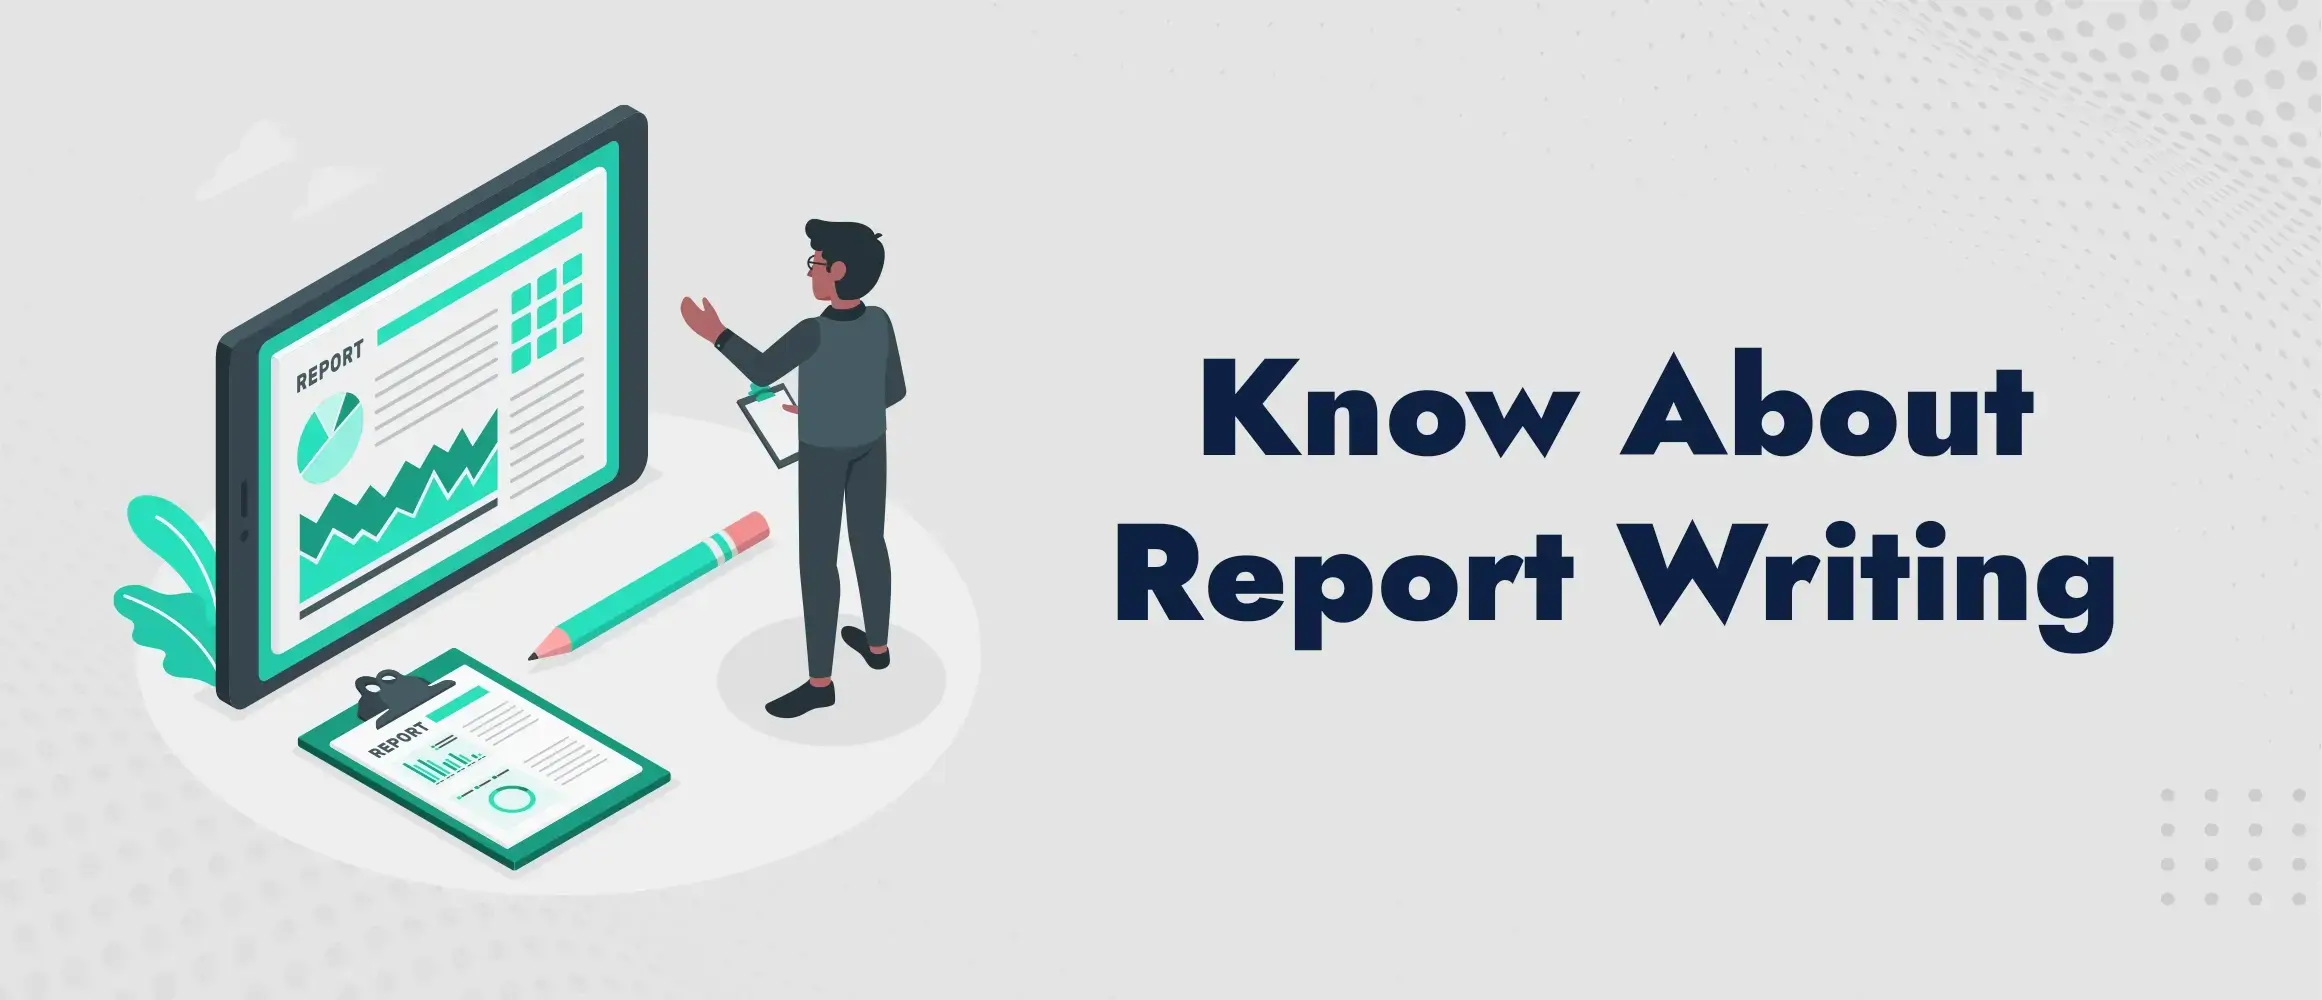 All that you need to Know About Report Writing